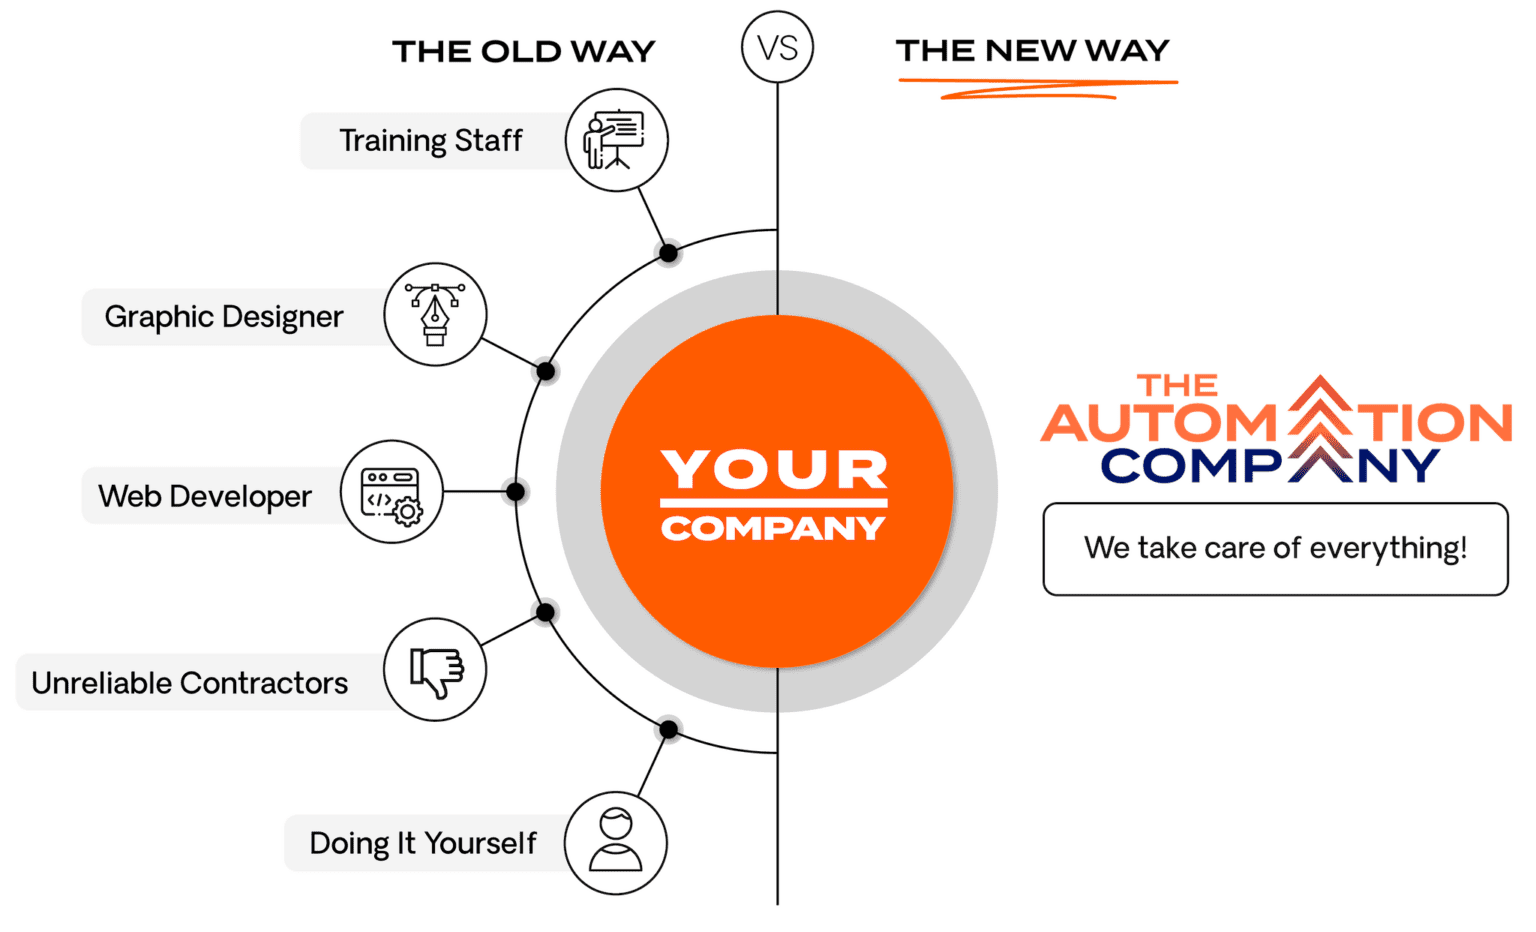 the old way of working with agencies vs. the new way